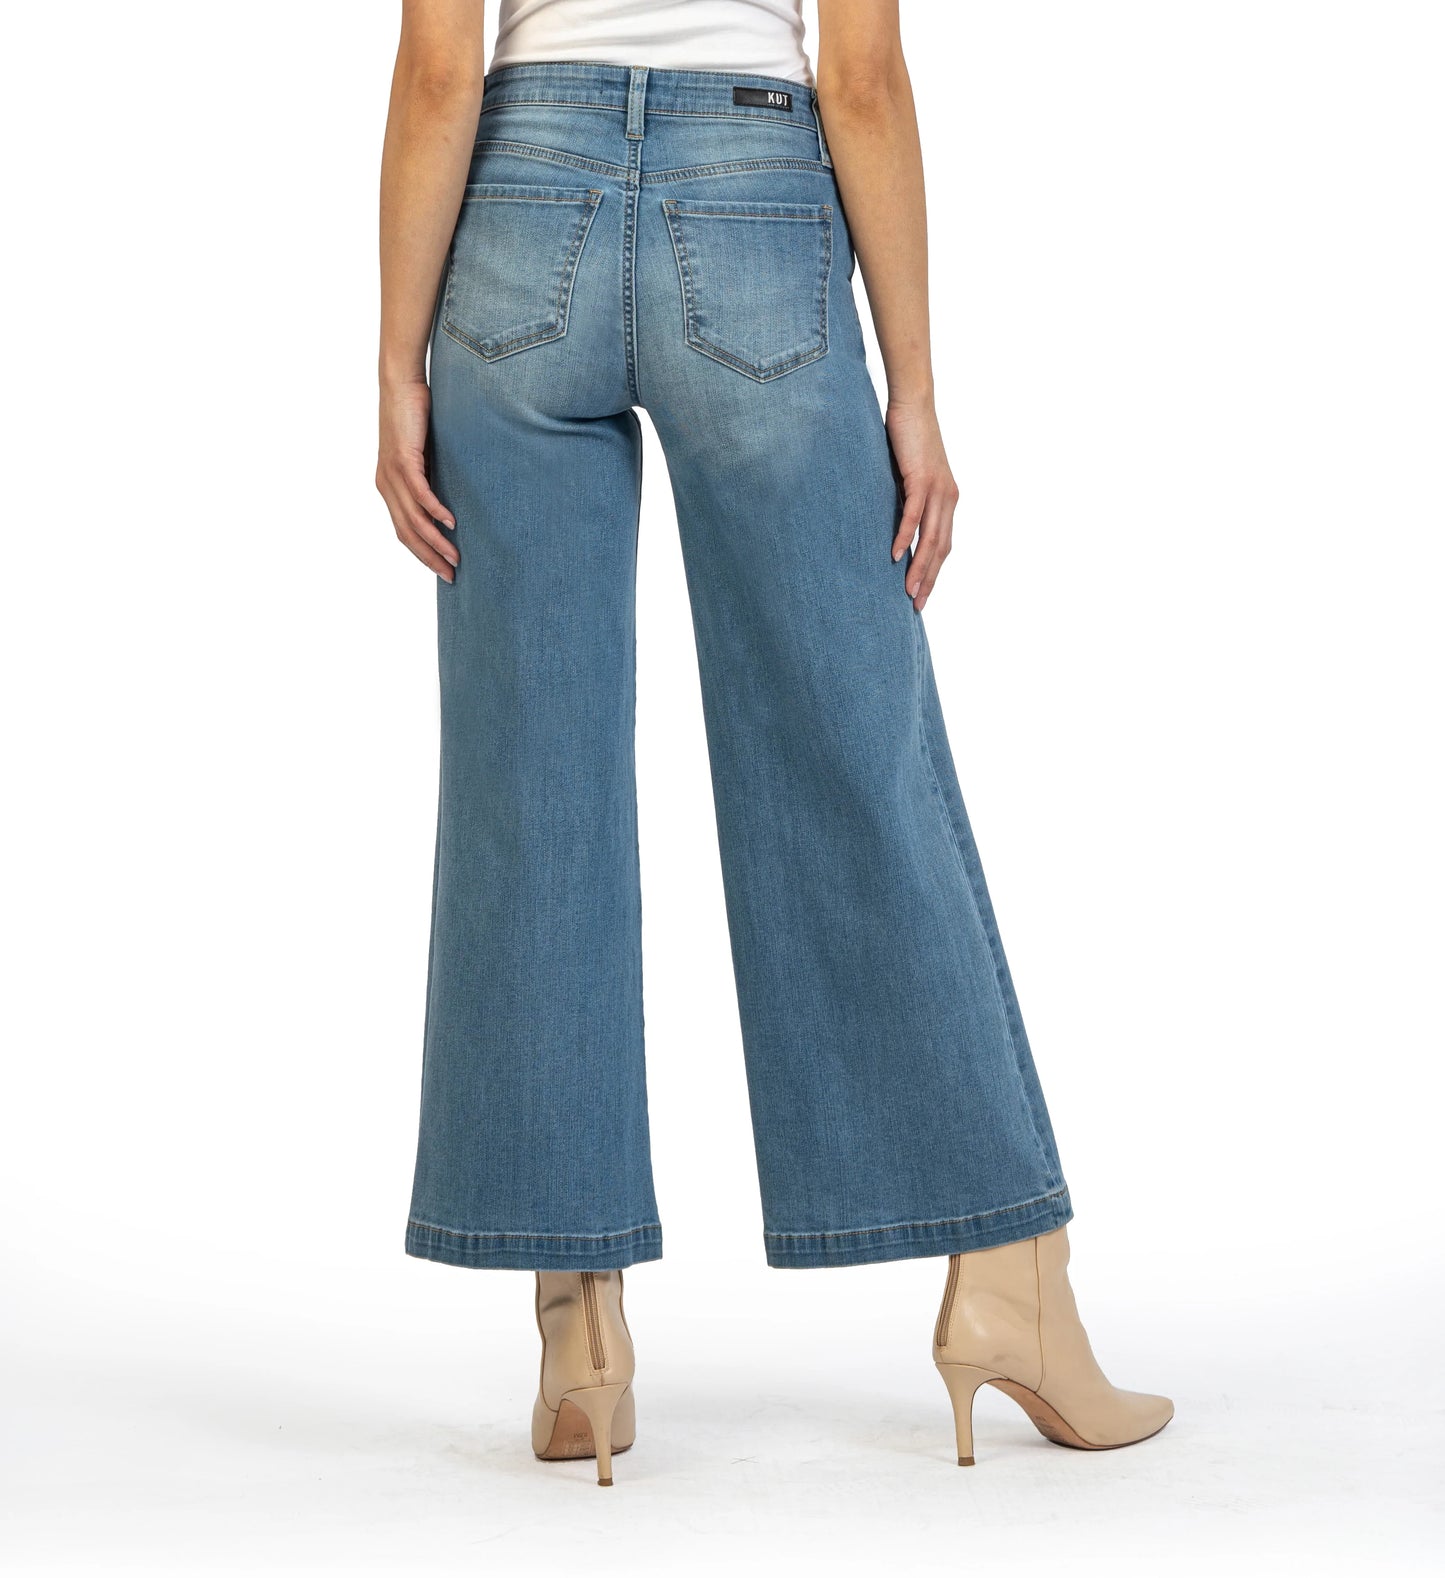 Kut From The Kloth Meg High Rise Fab Ab Jeans